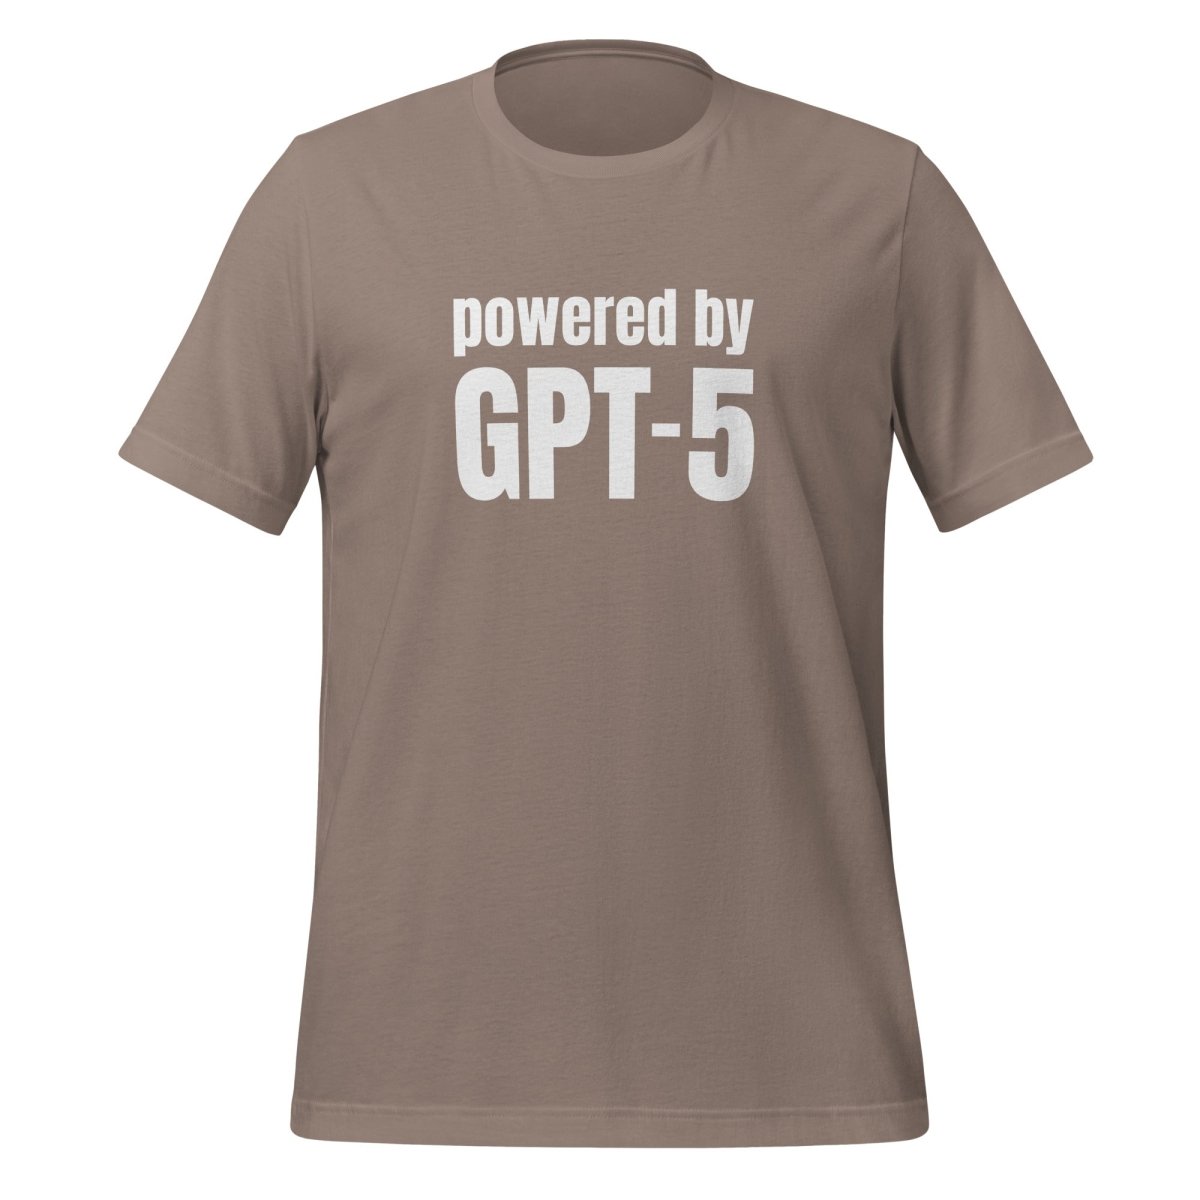 Powered by GPT - 5 T - Shirt (unisex) - Pebble - AI Store